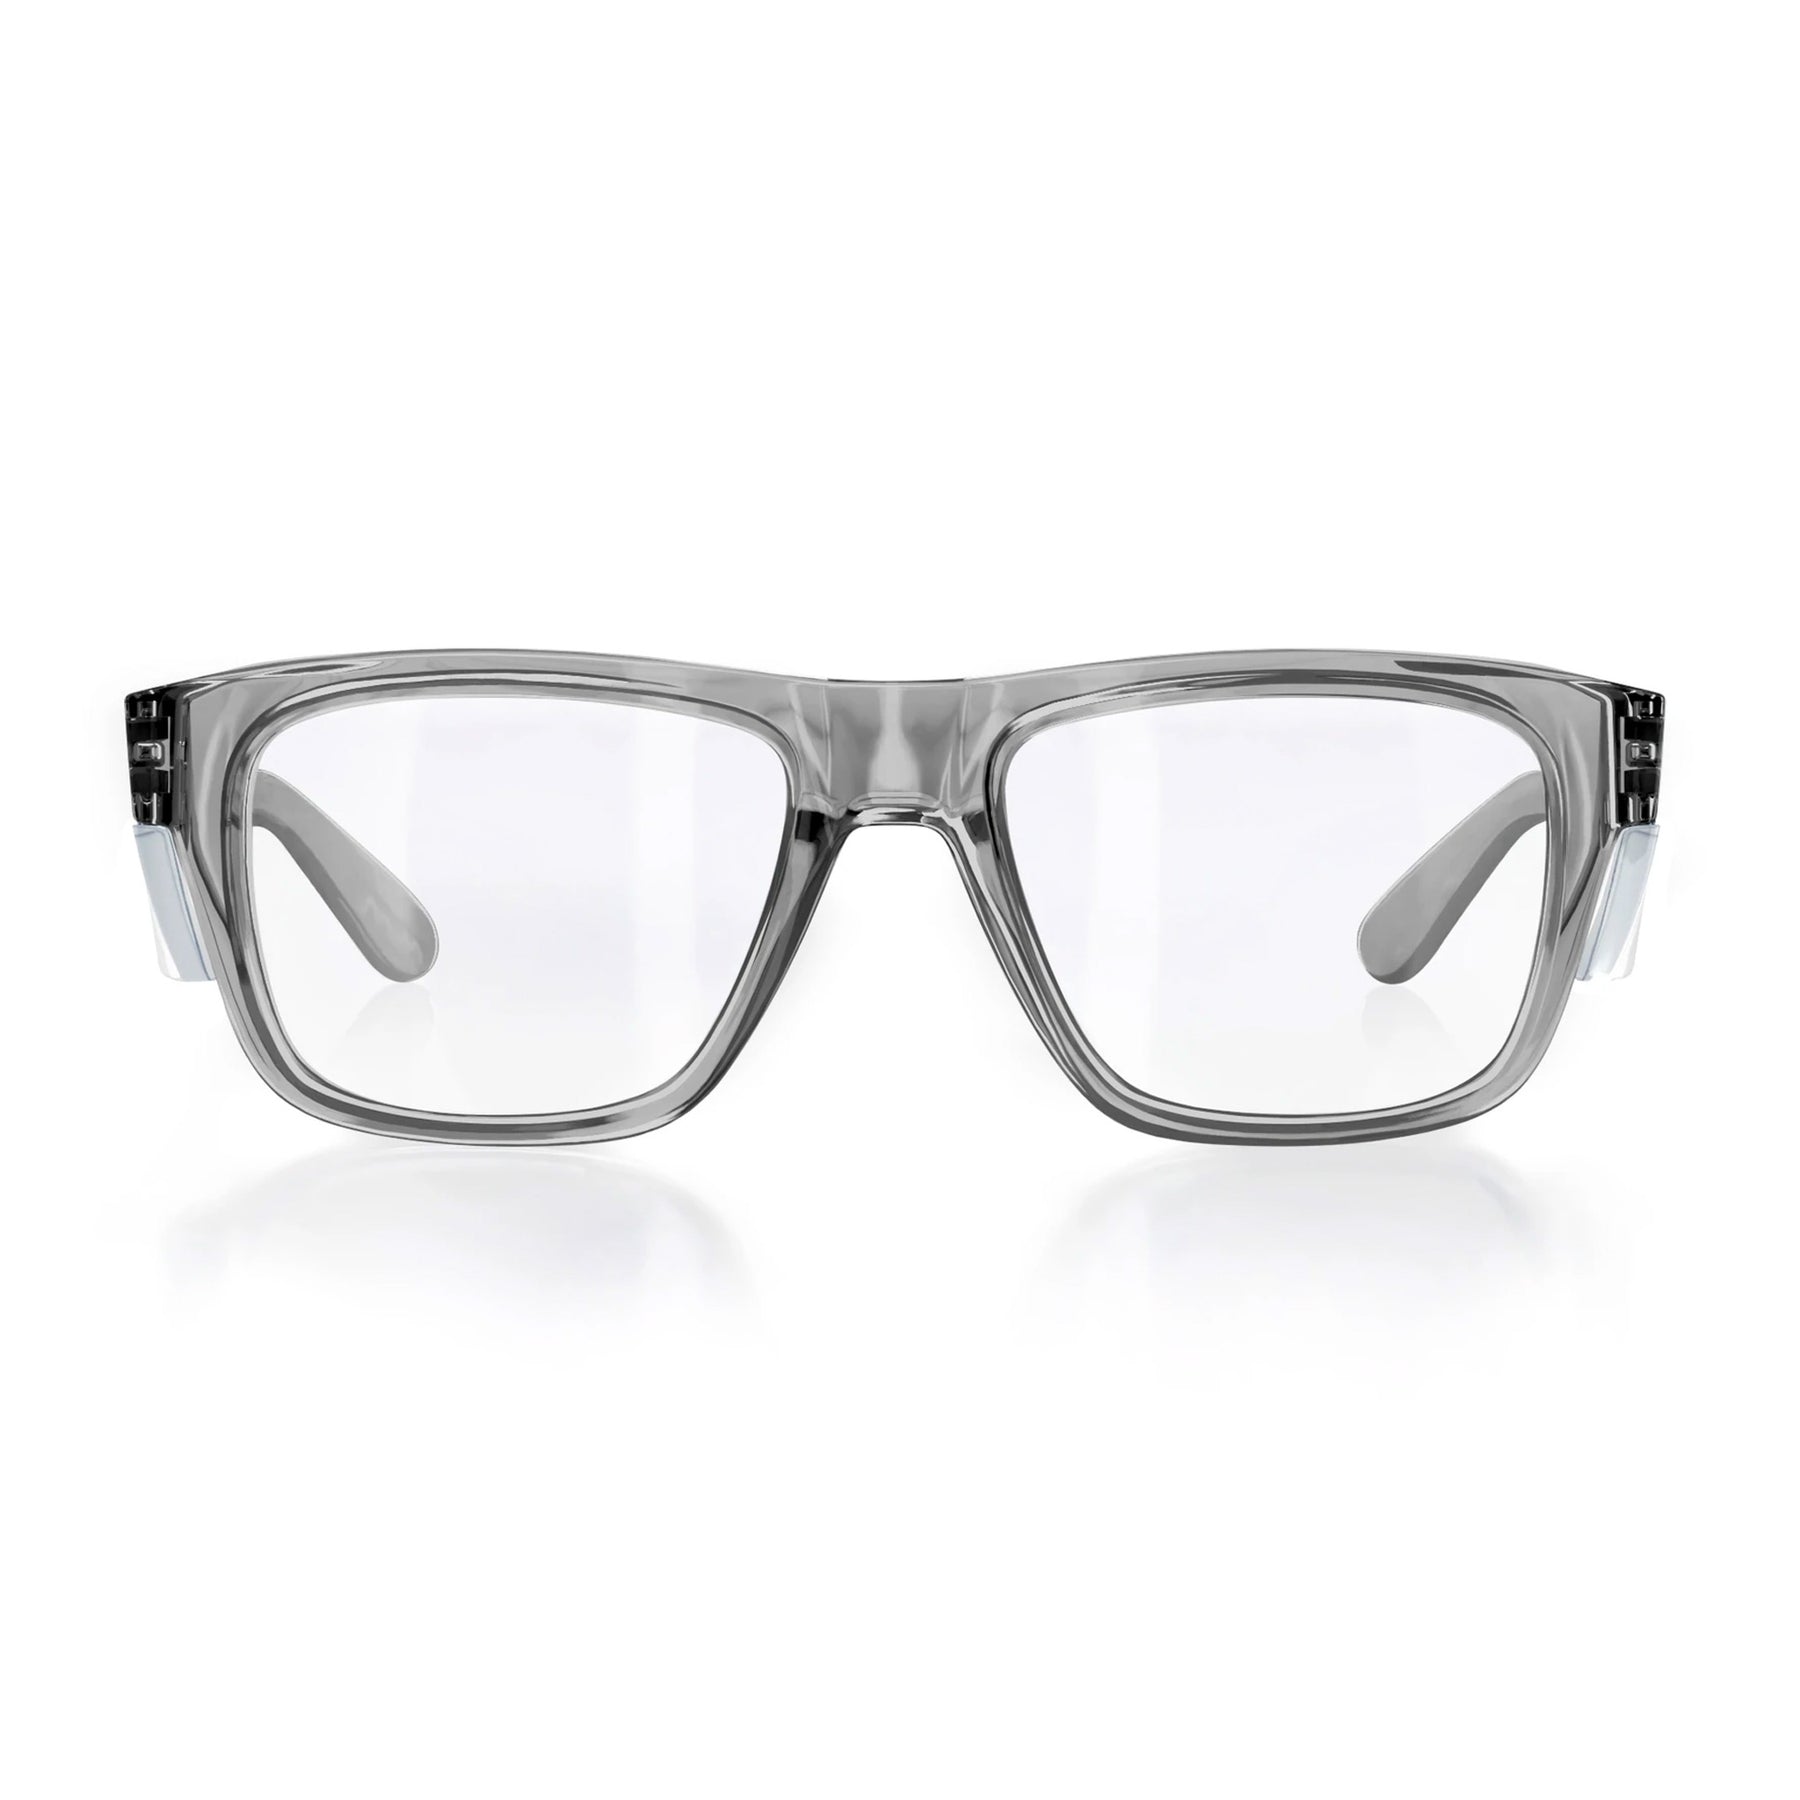 safestyle fusions graphite frame safety glasses with clear lens